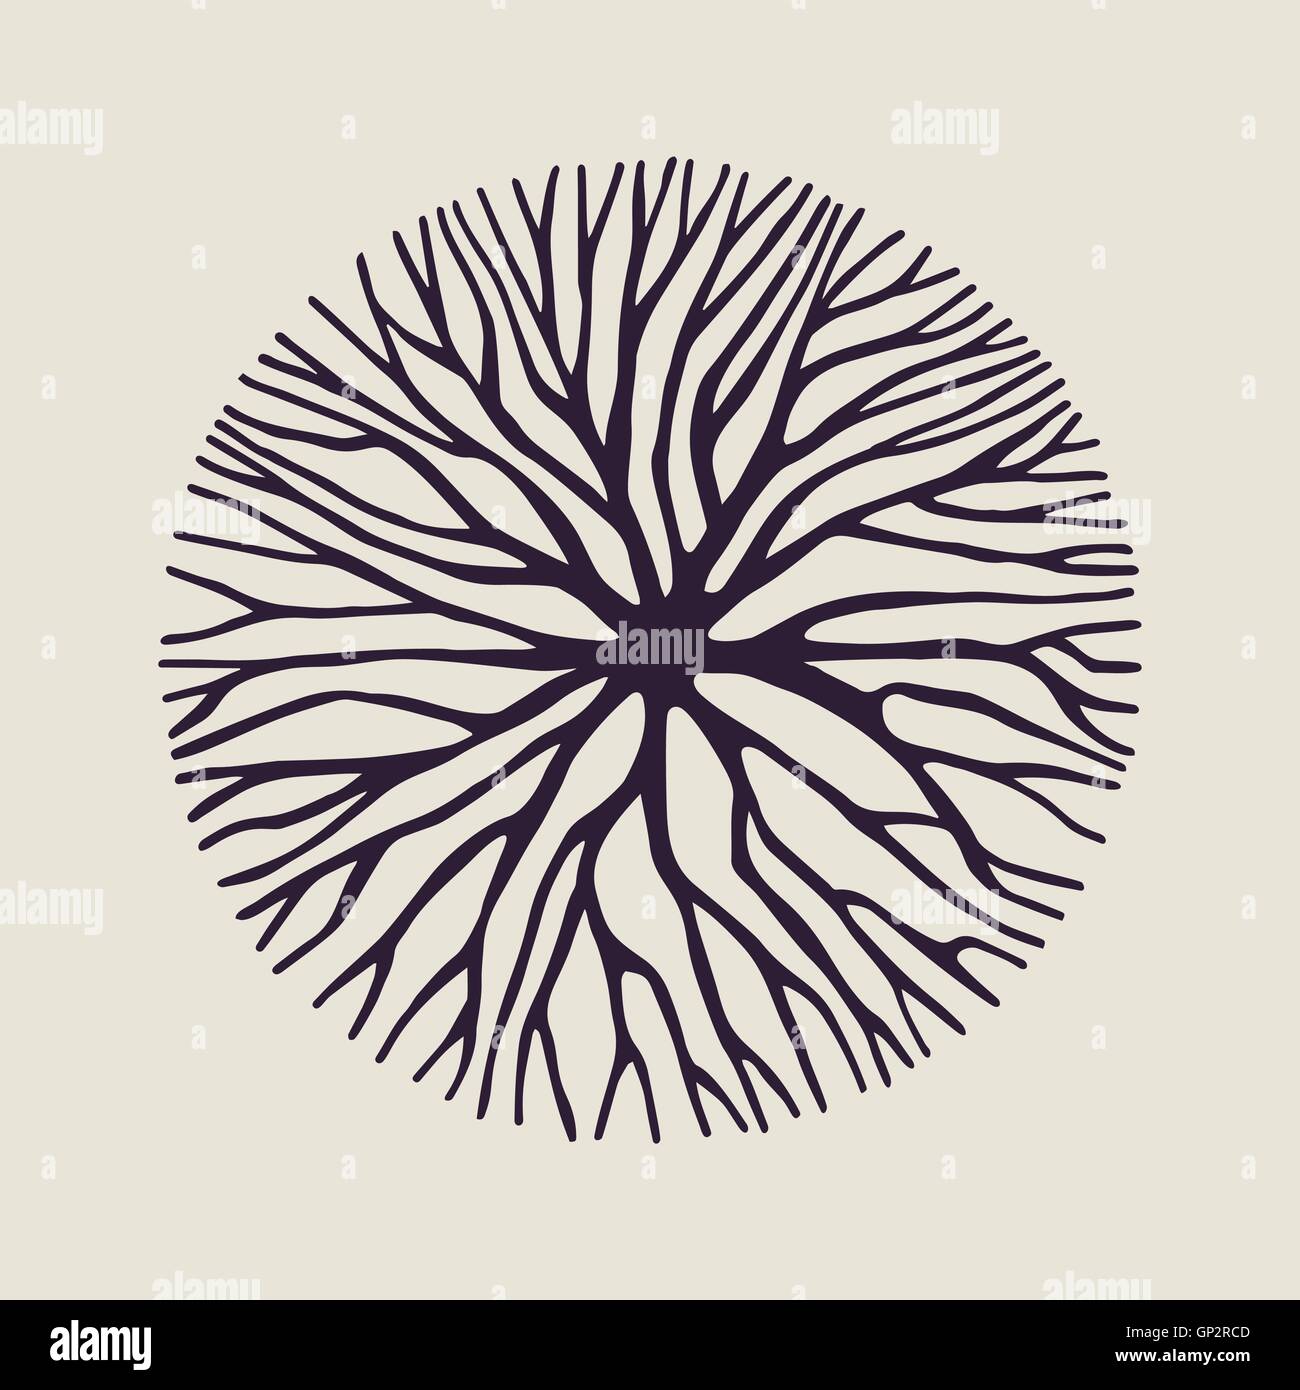 Abstract circle shape illustration of tree branches or roots for concept design, creative nature art. EPS10 vector. Stock Vector